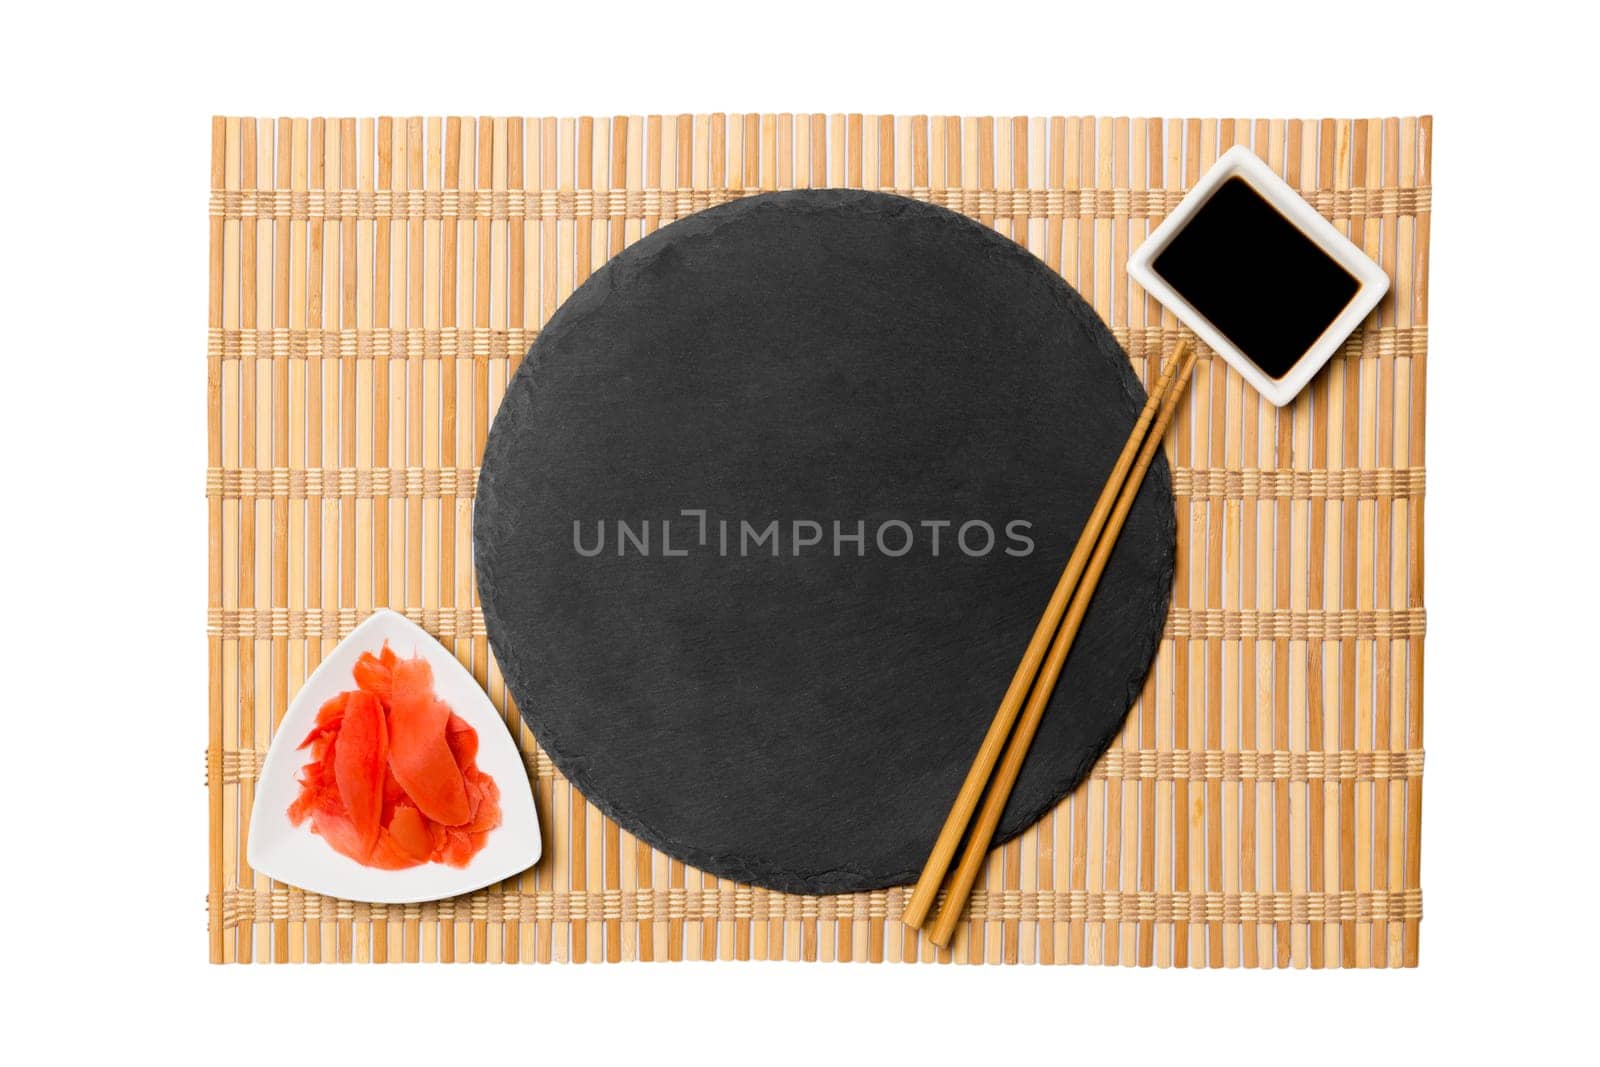 Emptyround black slate plate with chopsticks for sushi and soy sauce, ginger on yellow bamboo mat background. Top view with copy space for you design.